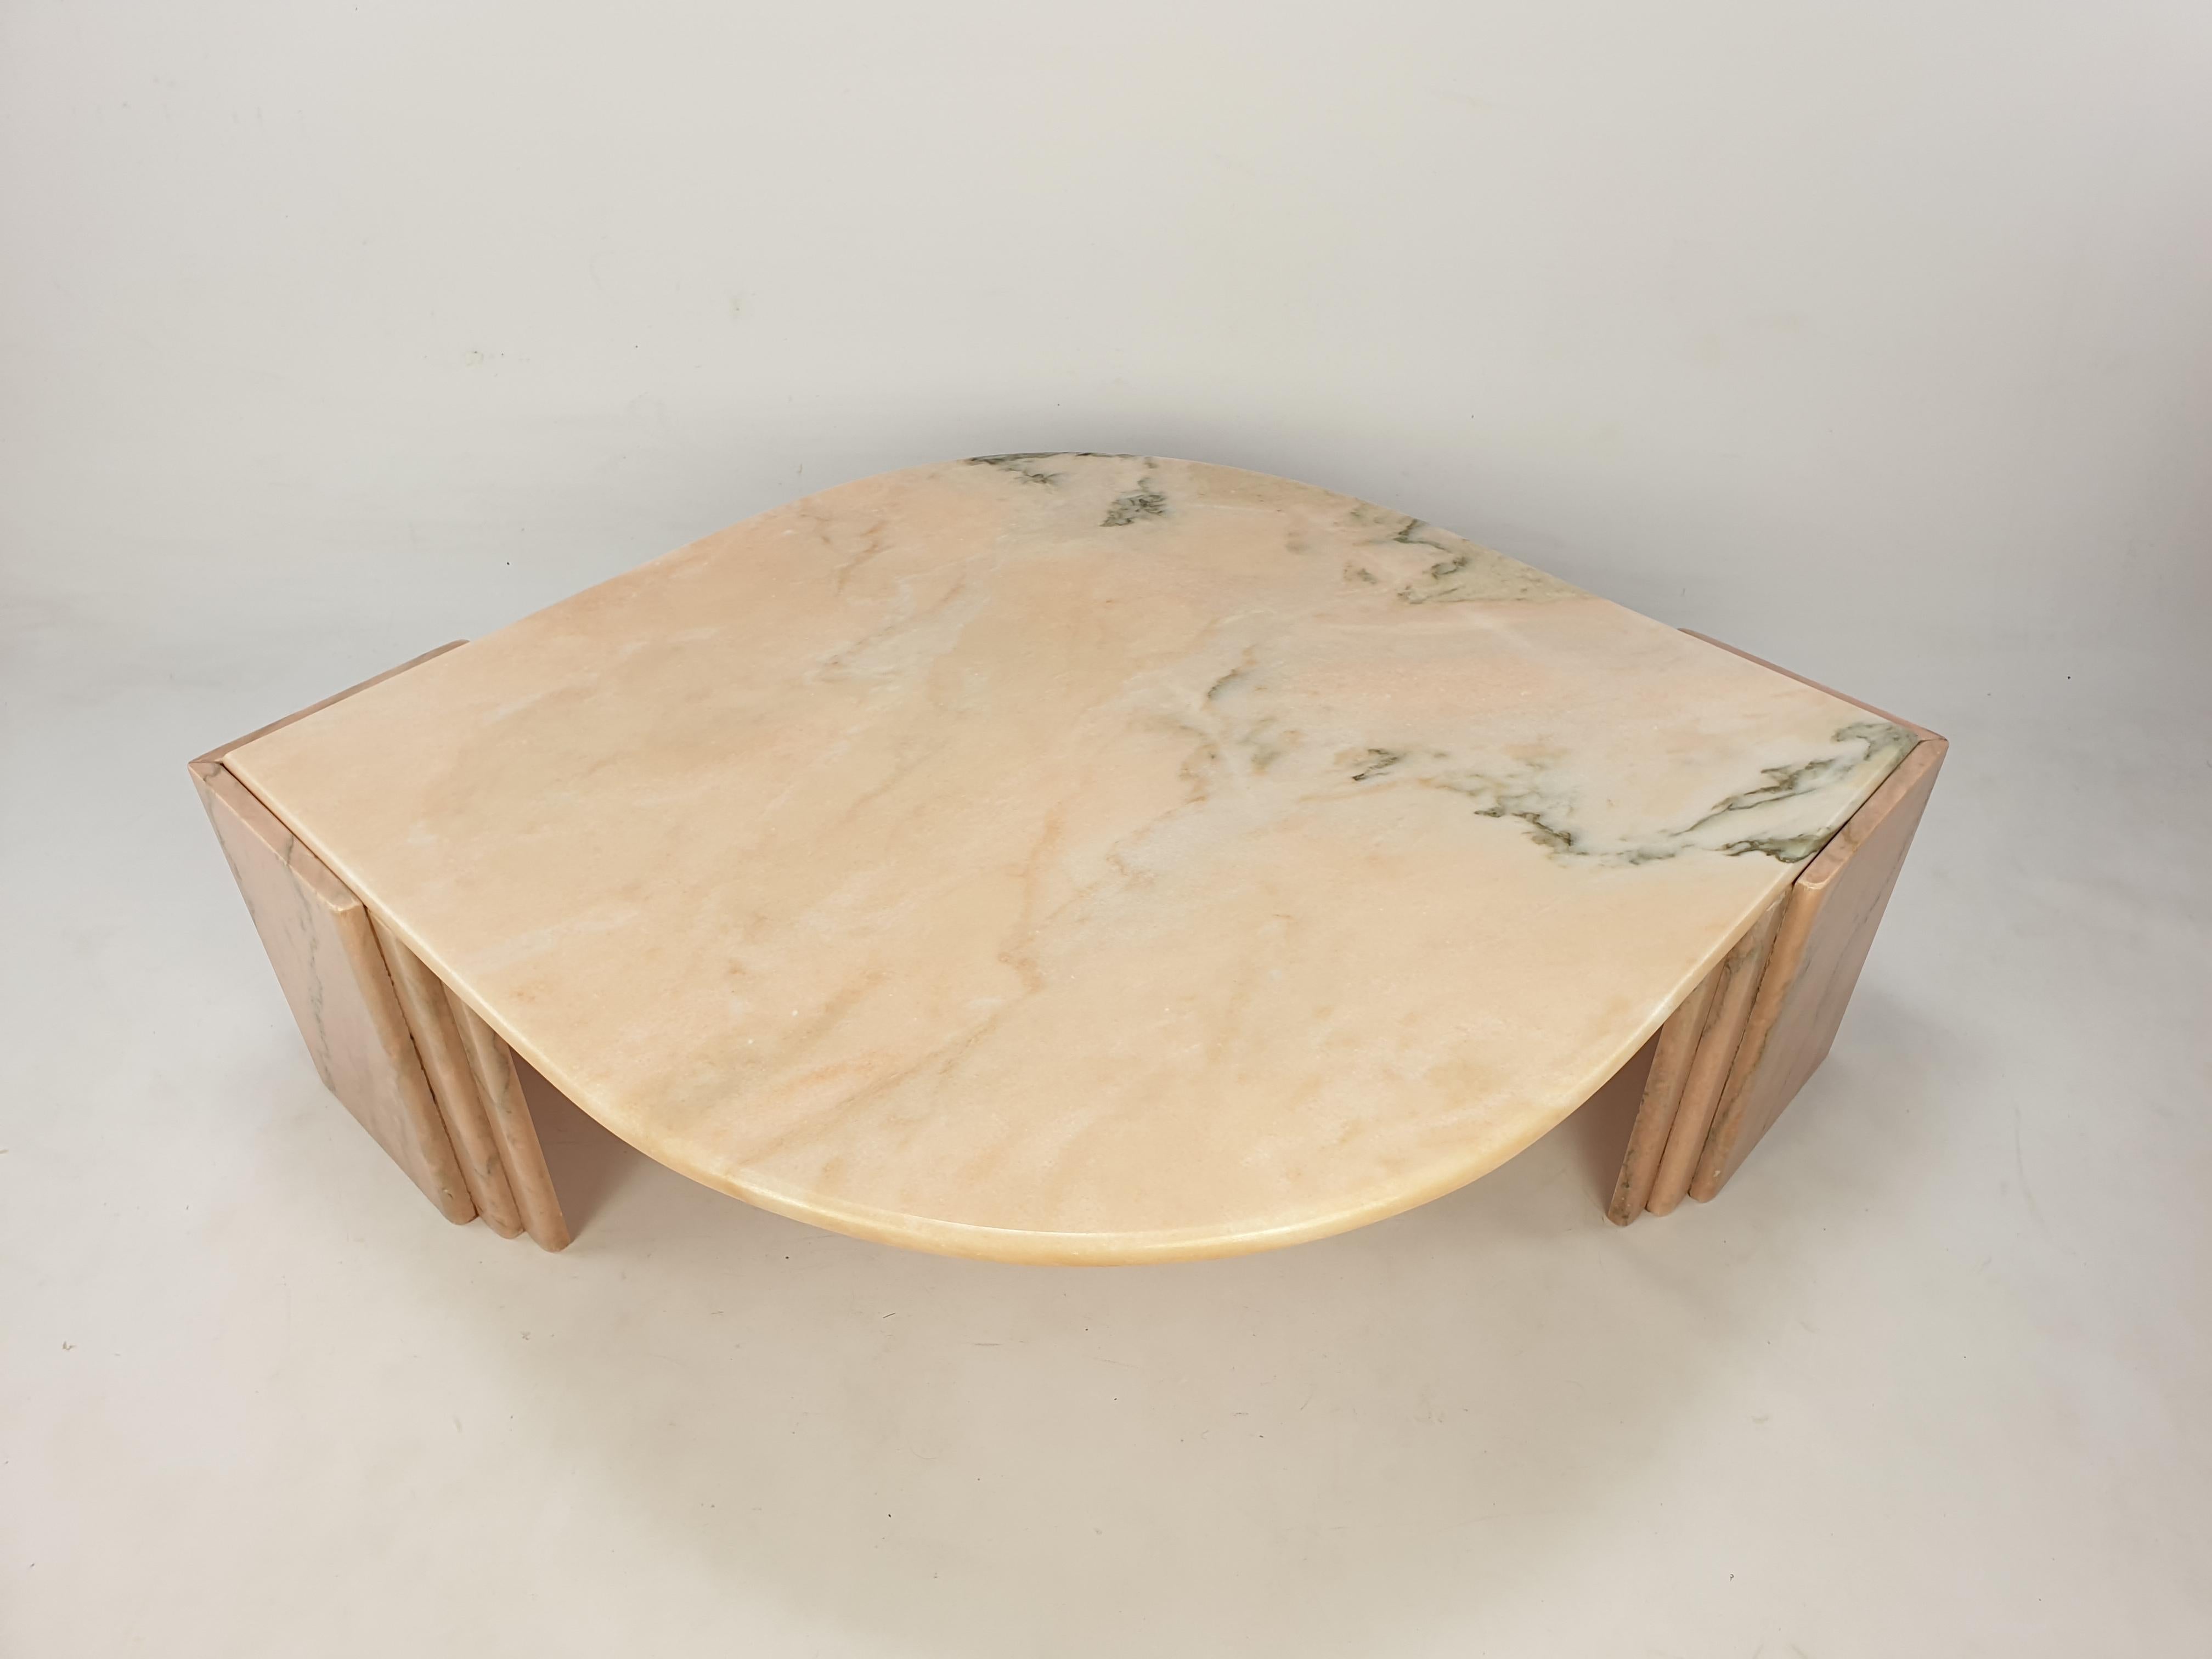 Very elegant Italian coffee table handcrafted out of lovely colored pink marble. The beautiful teardrop shaped top is rounded on the edge. The base is made of two separate pieces. This stunning table will make the perfect addition to any seating or